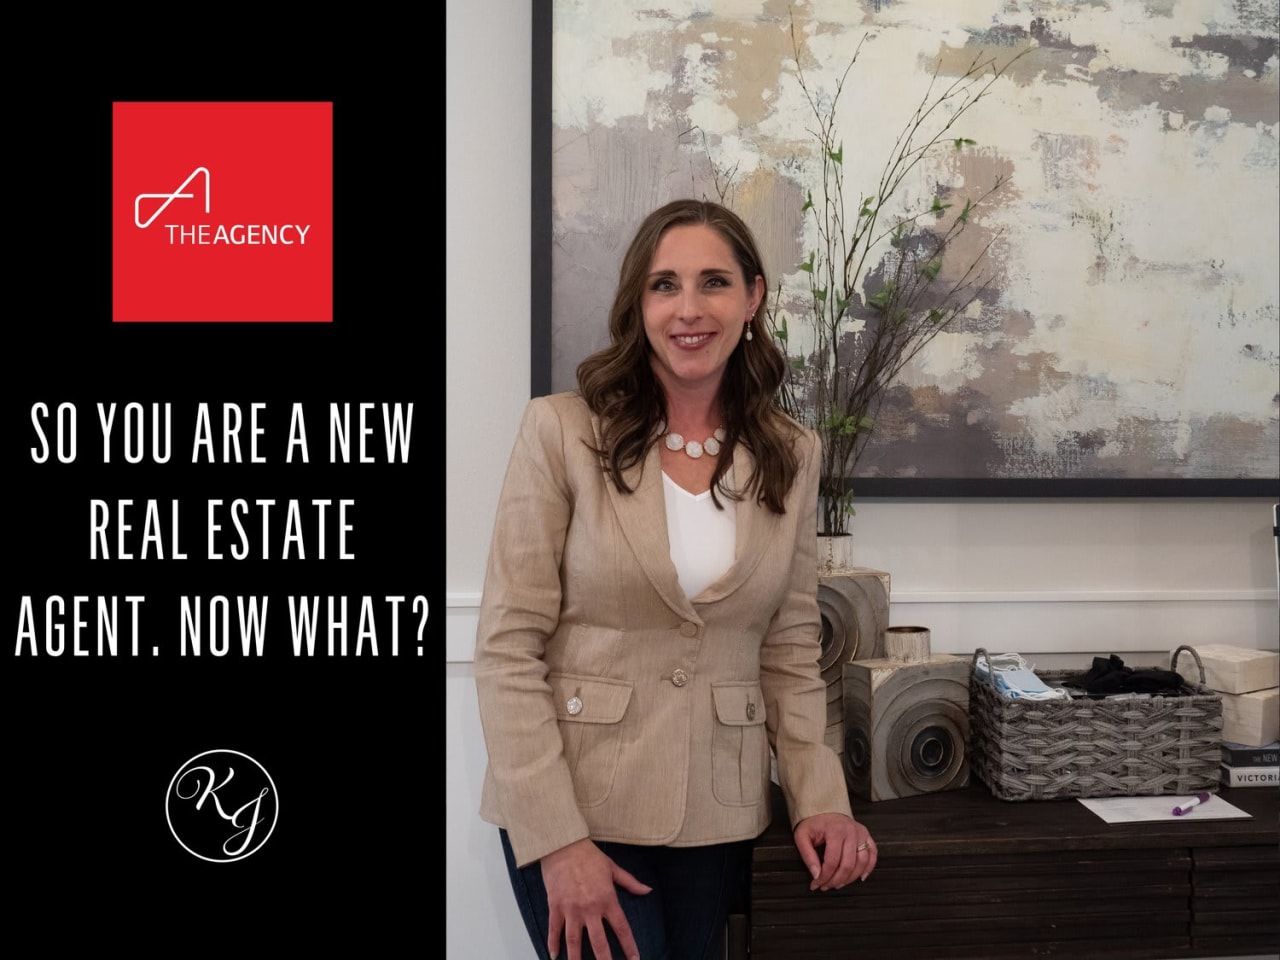 So You are a New Real Estate Agent. Now What?